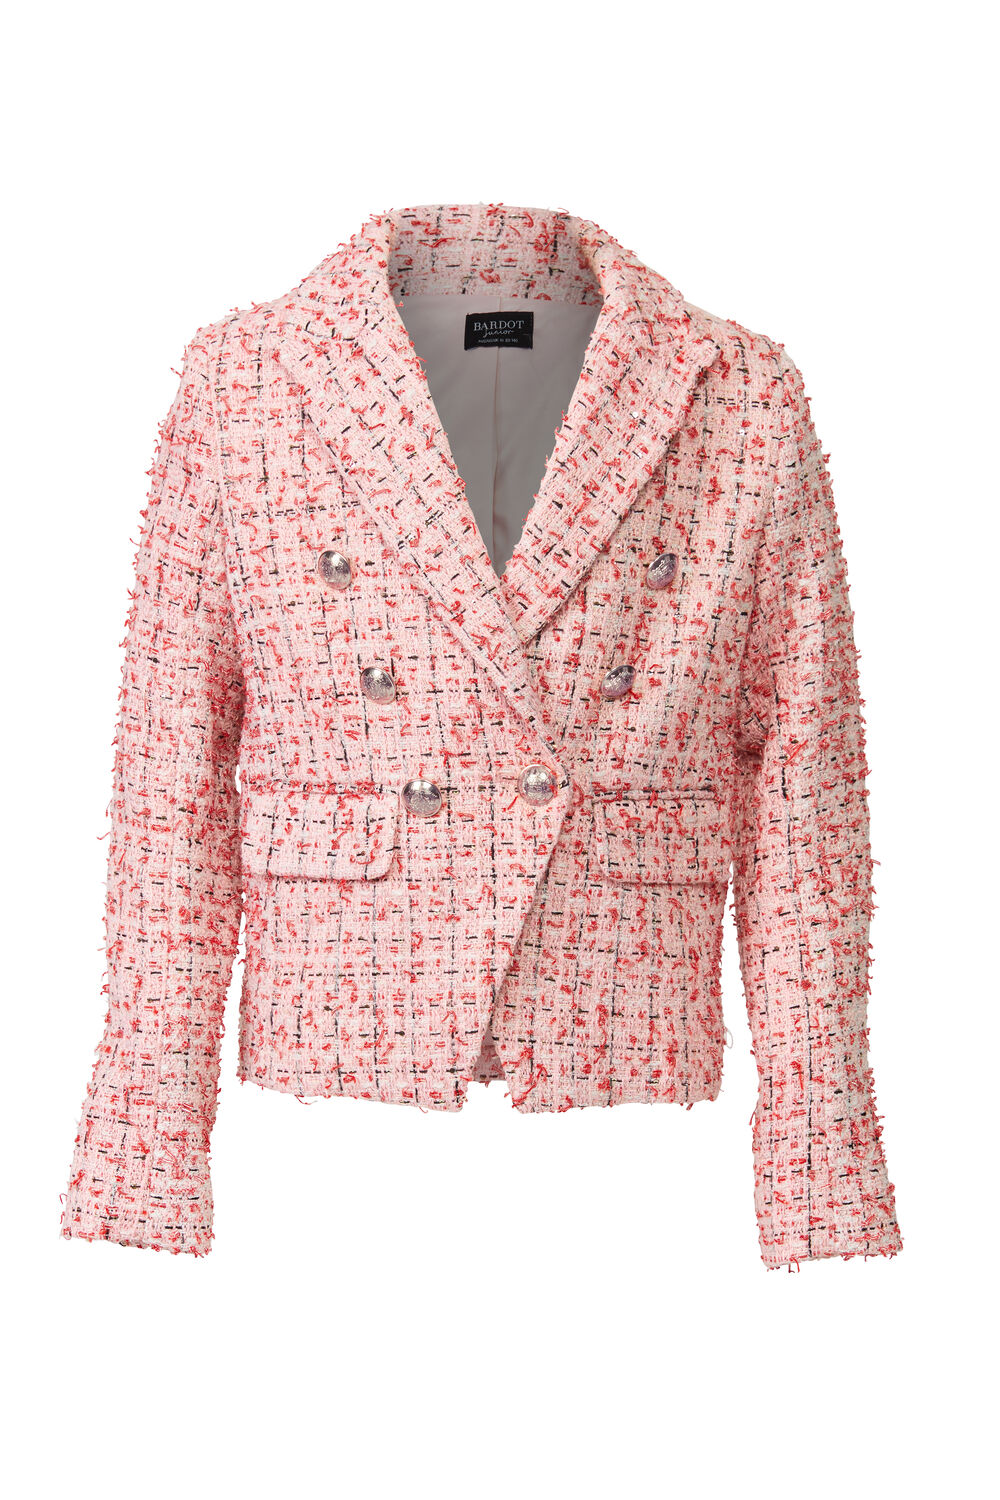 GIRLS ROMA BOUCLE BLAZER in colour MARY'S ROSE